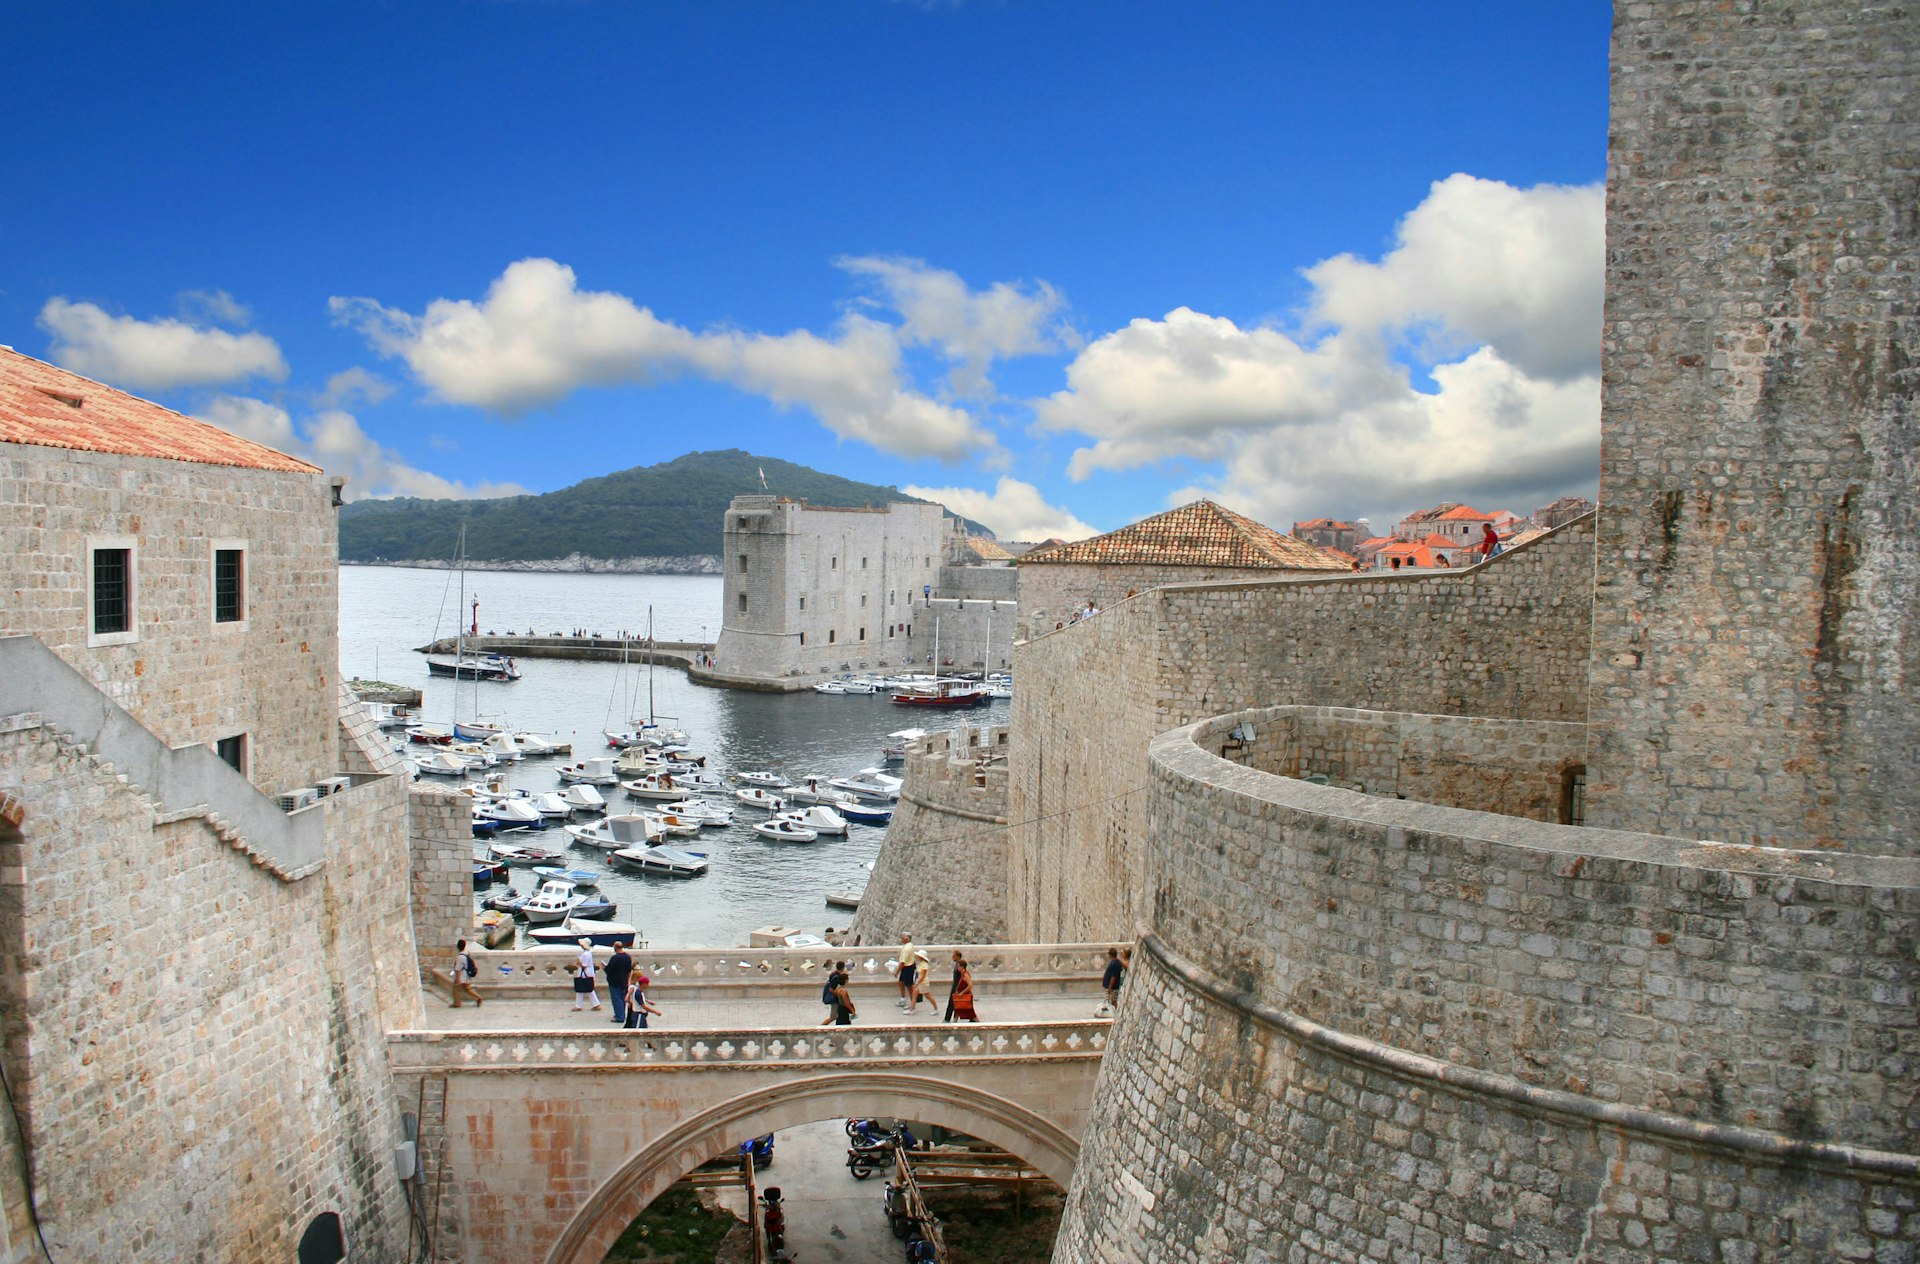 People walking across a stone bridge in Dubrovnik with the harbour beyond